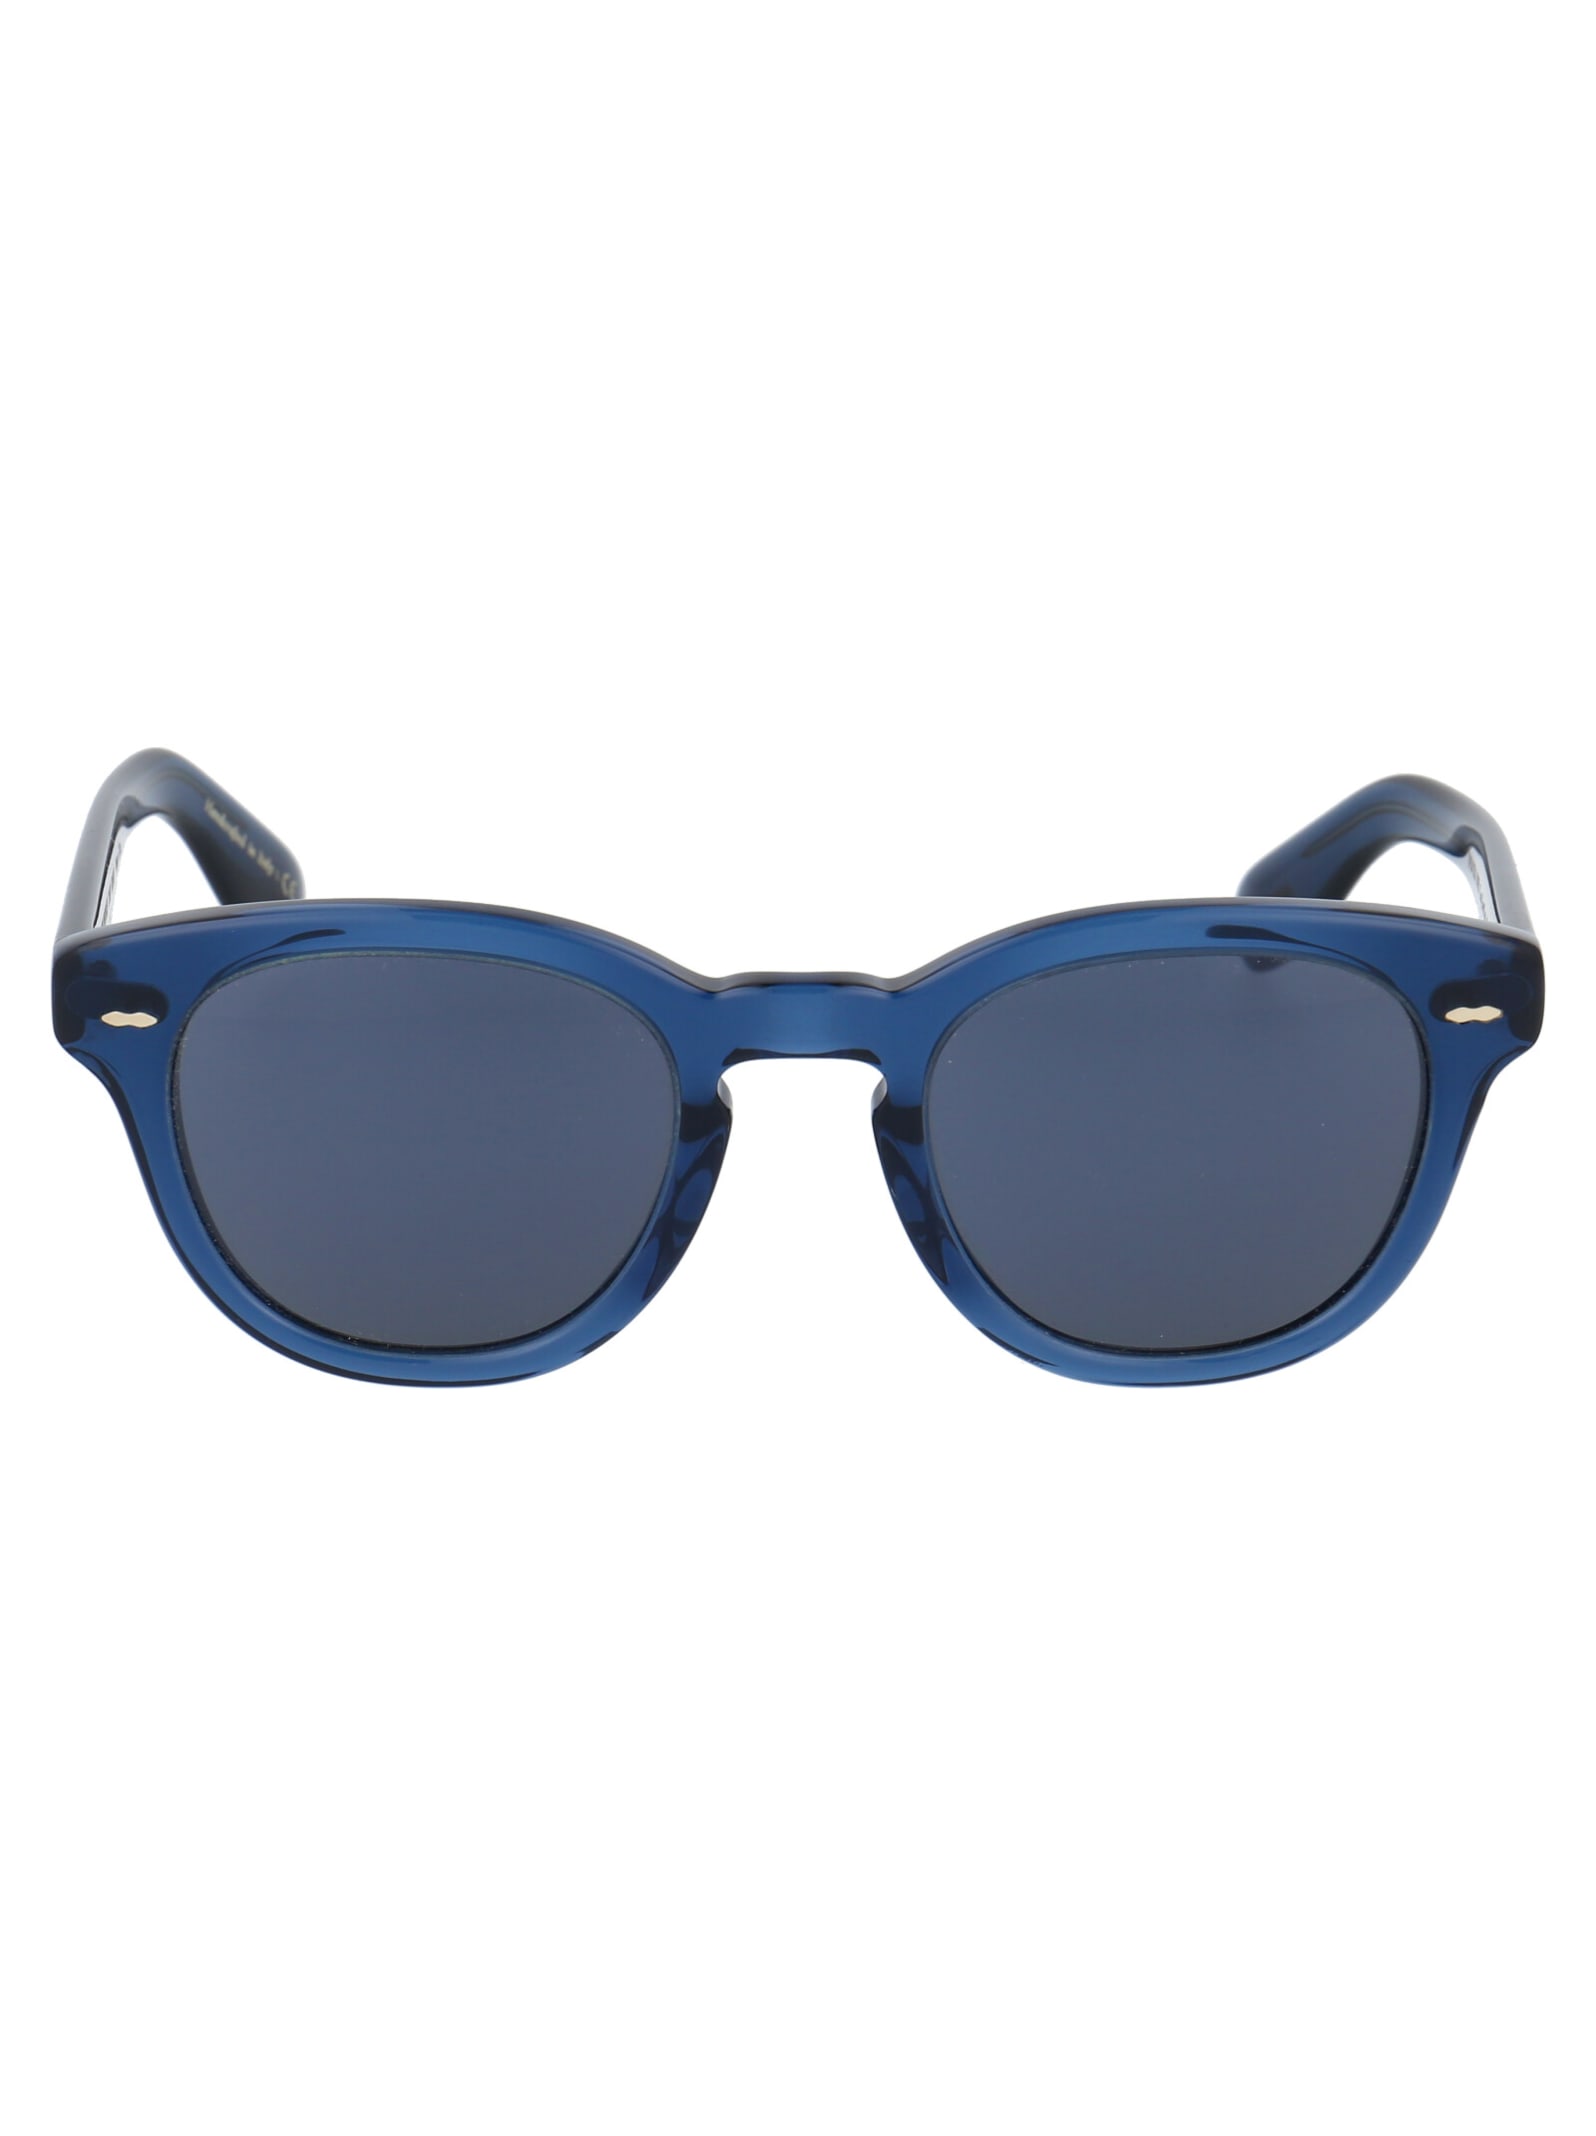 Oliver Peoples Cary Grant Sun Sunglasses